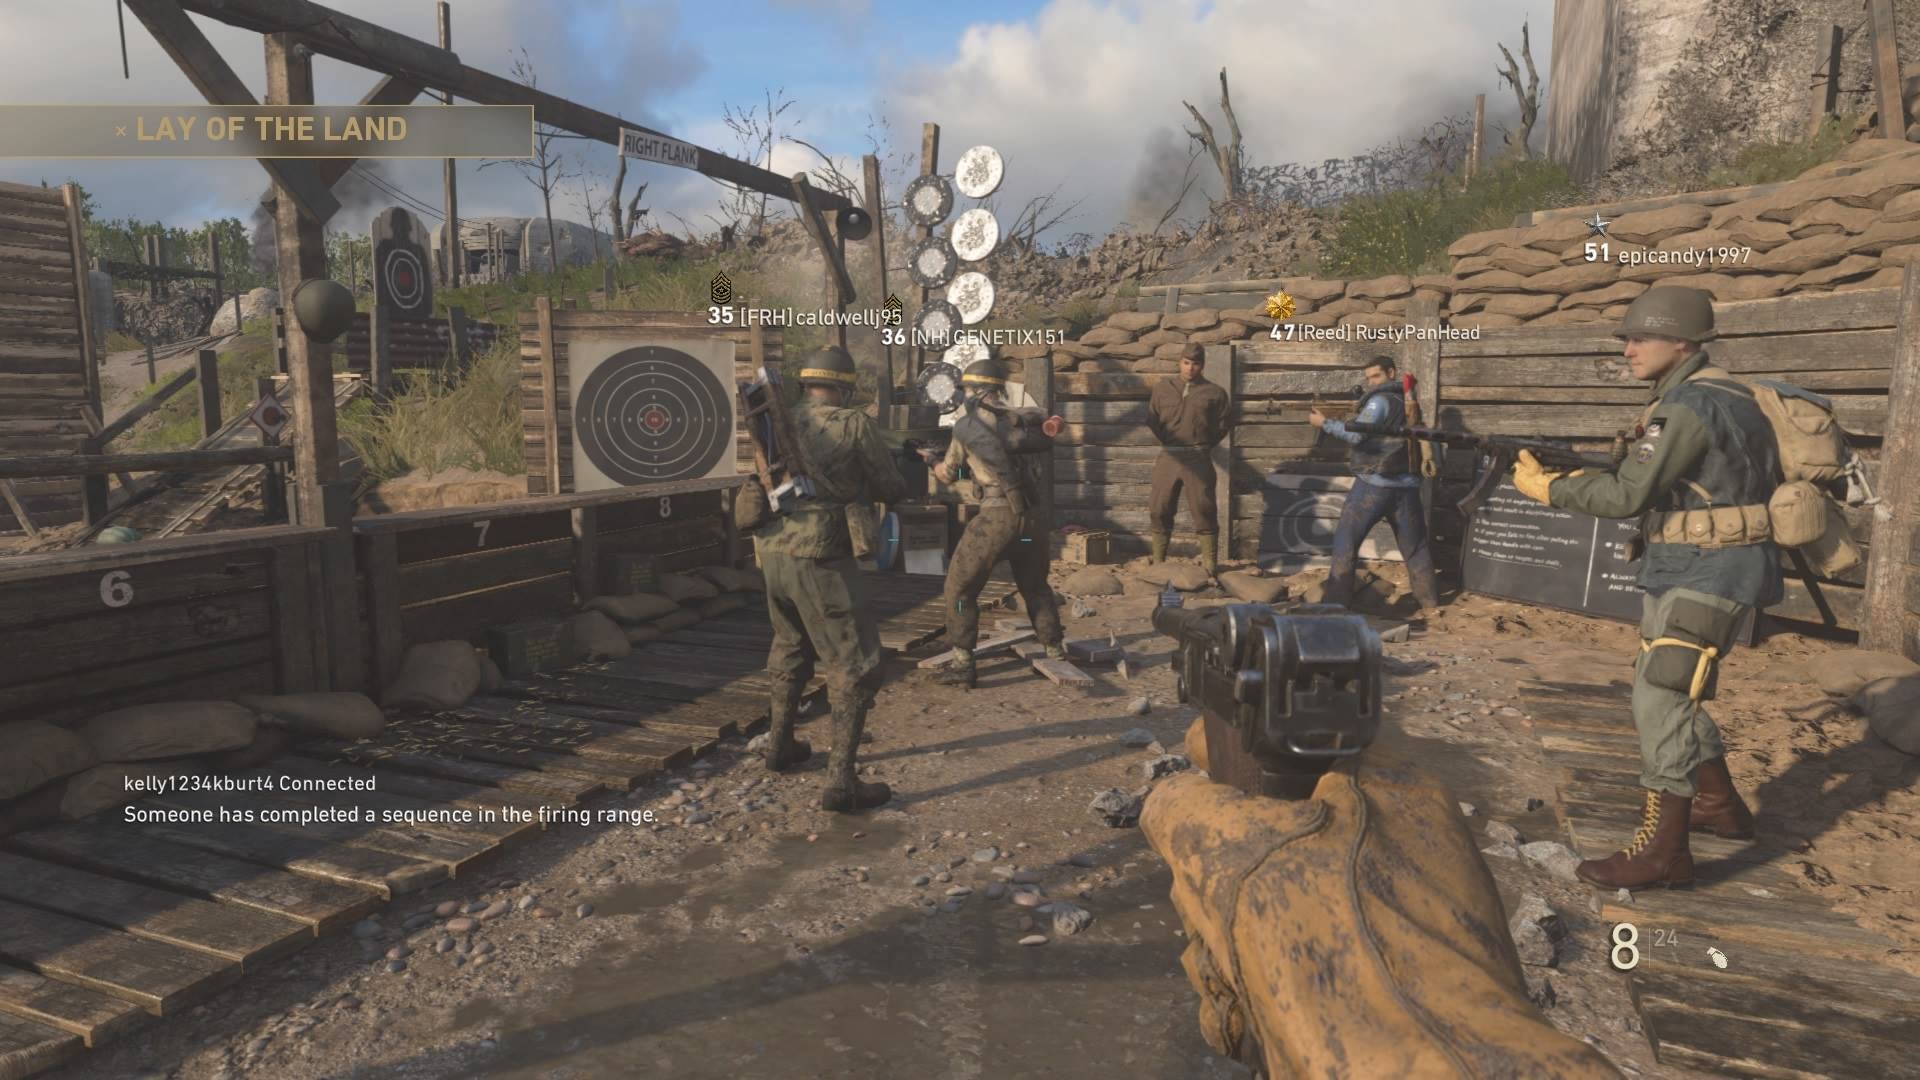 Sige Ud over høst The latest Call of Duty WW2 patch restores headquarters to full operation  and introduces other tweaks | VG247